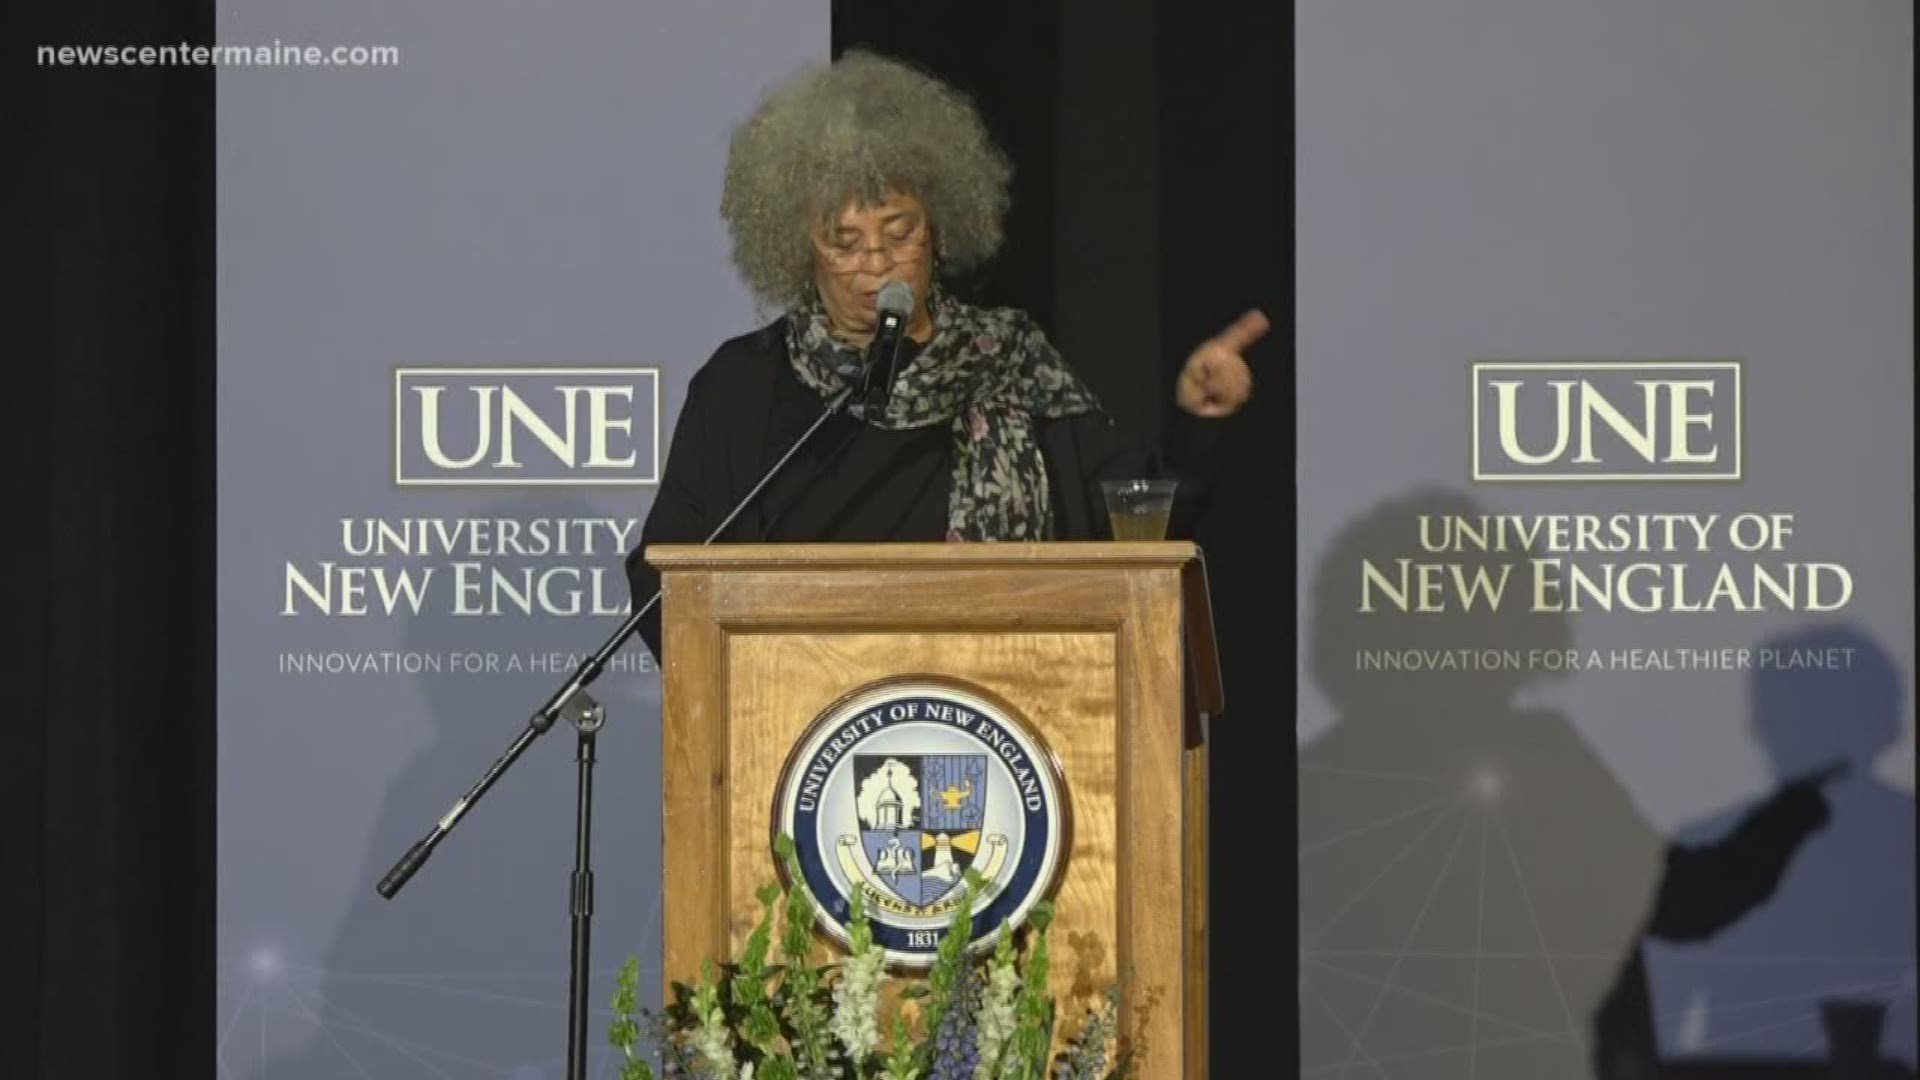 Activist and Author Angela Davis visited UNE Wednesday to commemorate the life and legacy of Dr. Martin Luther King with a 30 minute address.